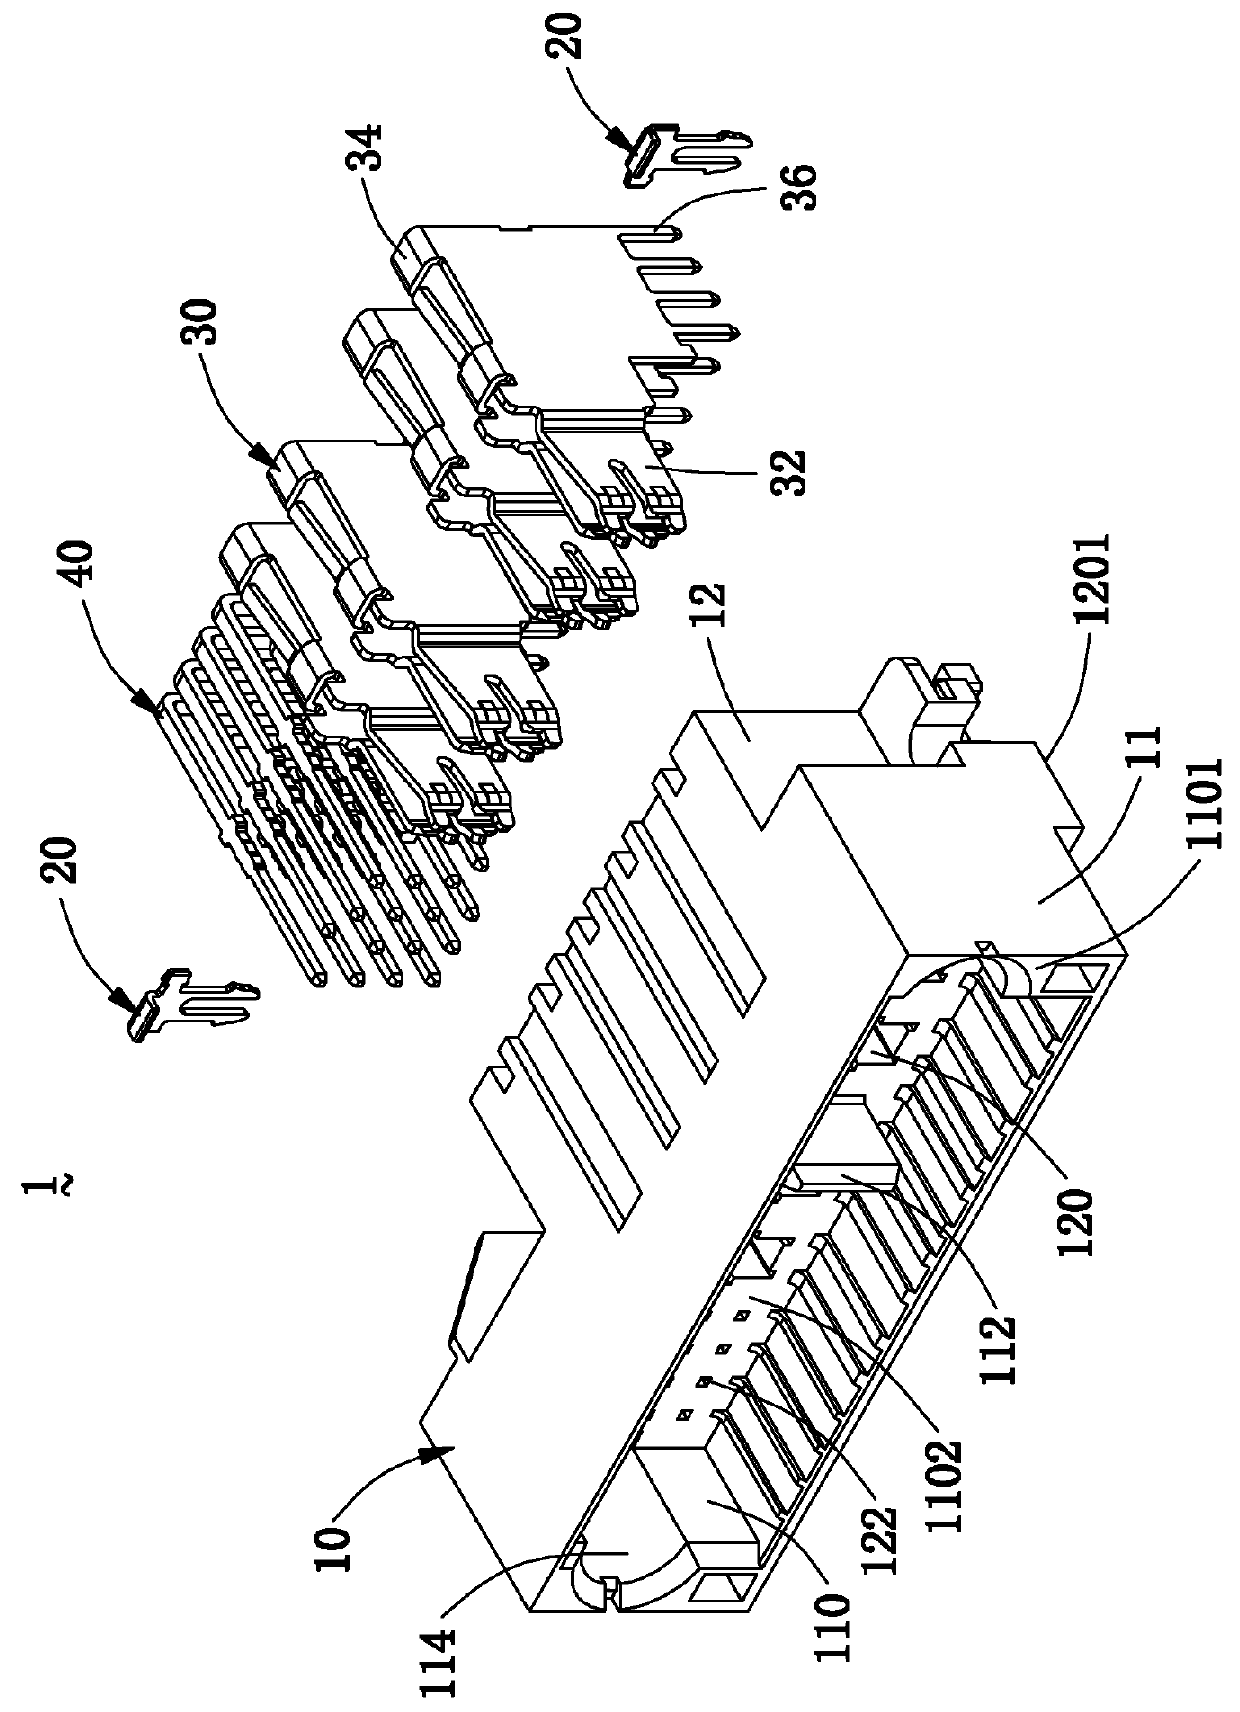 Electrical connector with locking structures